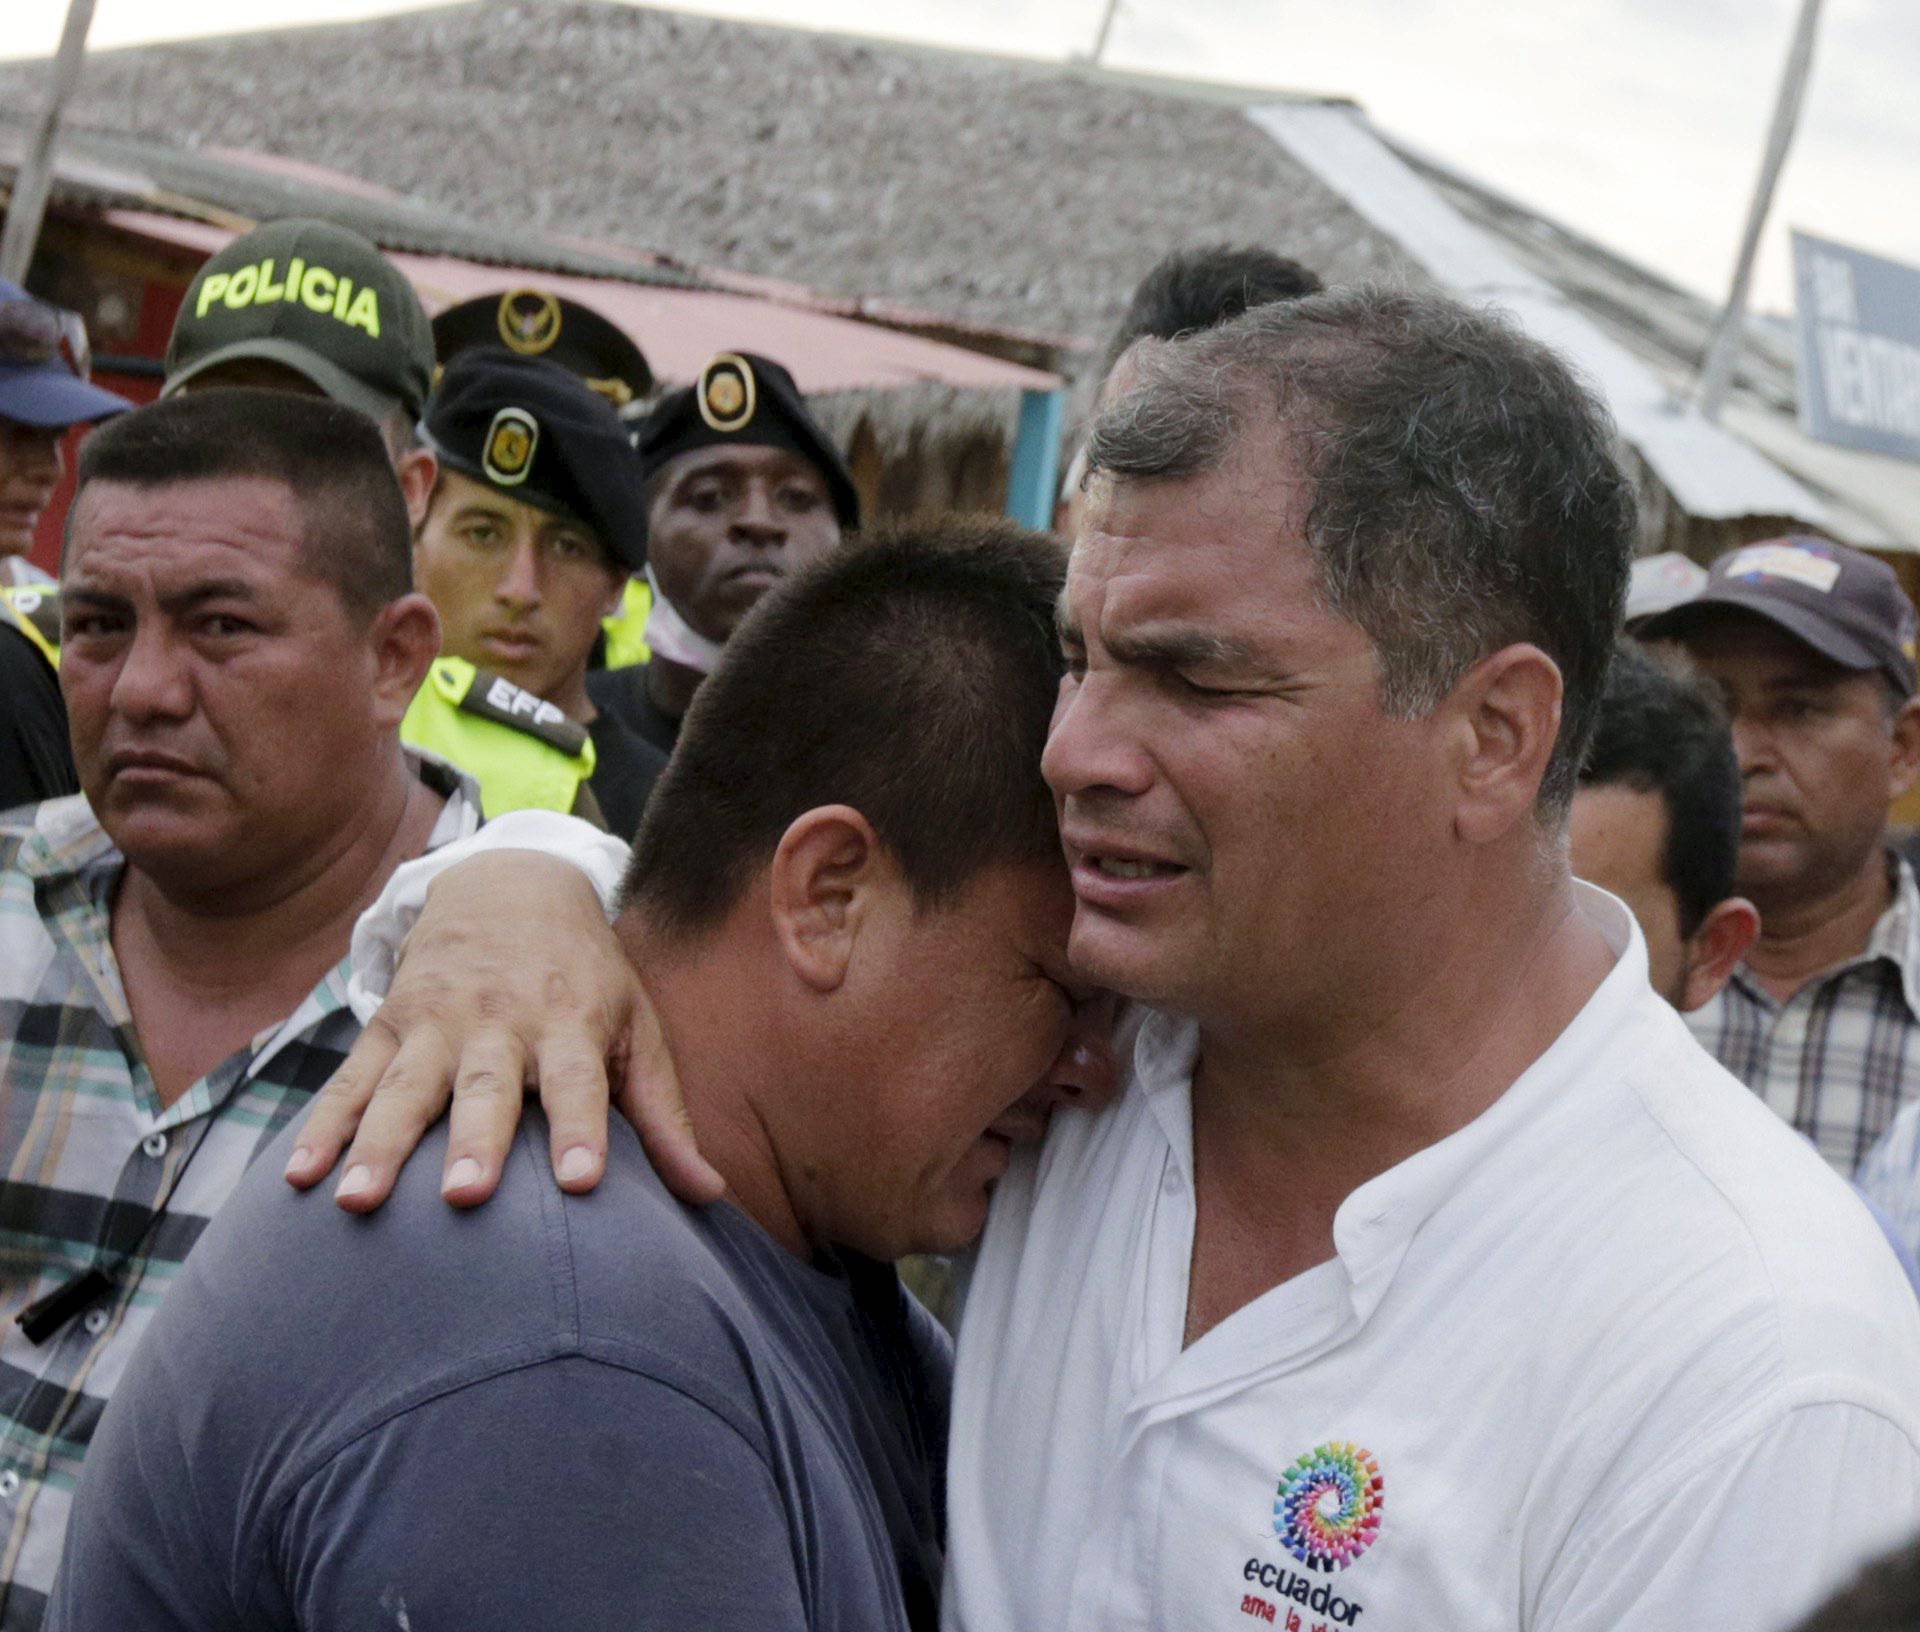 Ecuador's President Correa embraces a resident after the earthquake in the town of Canoa